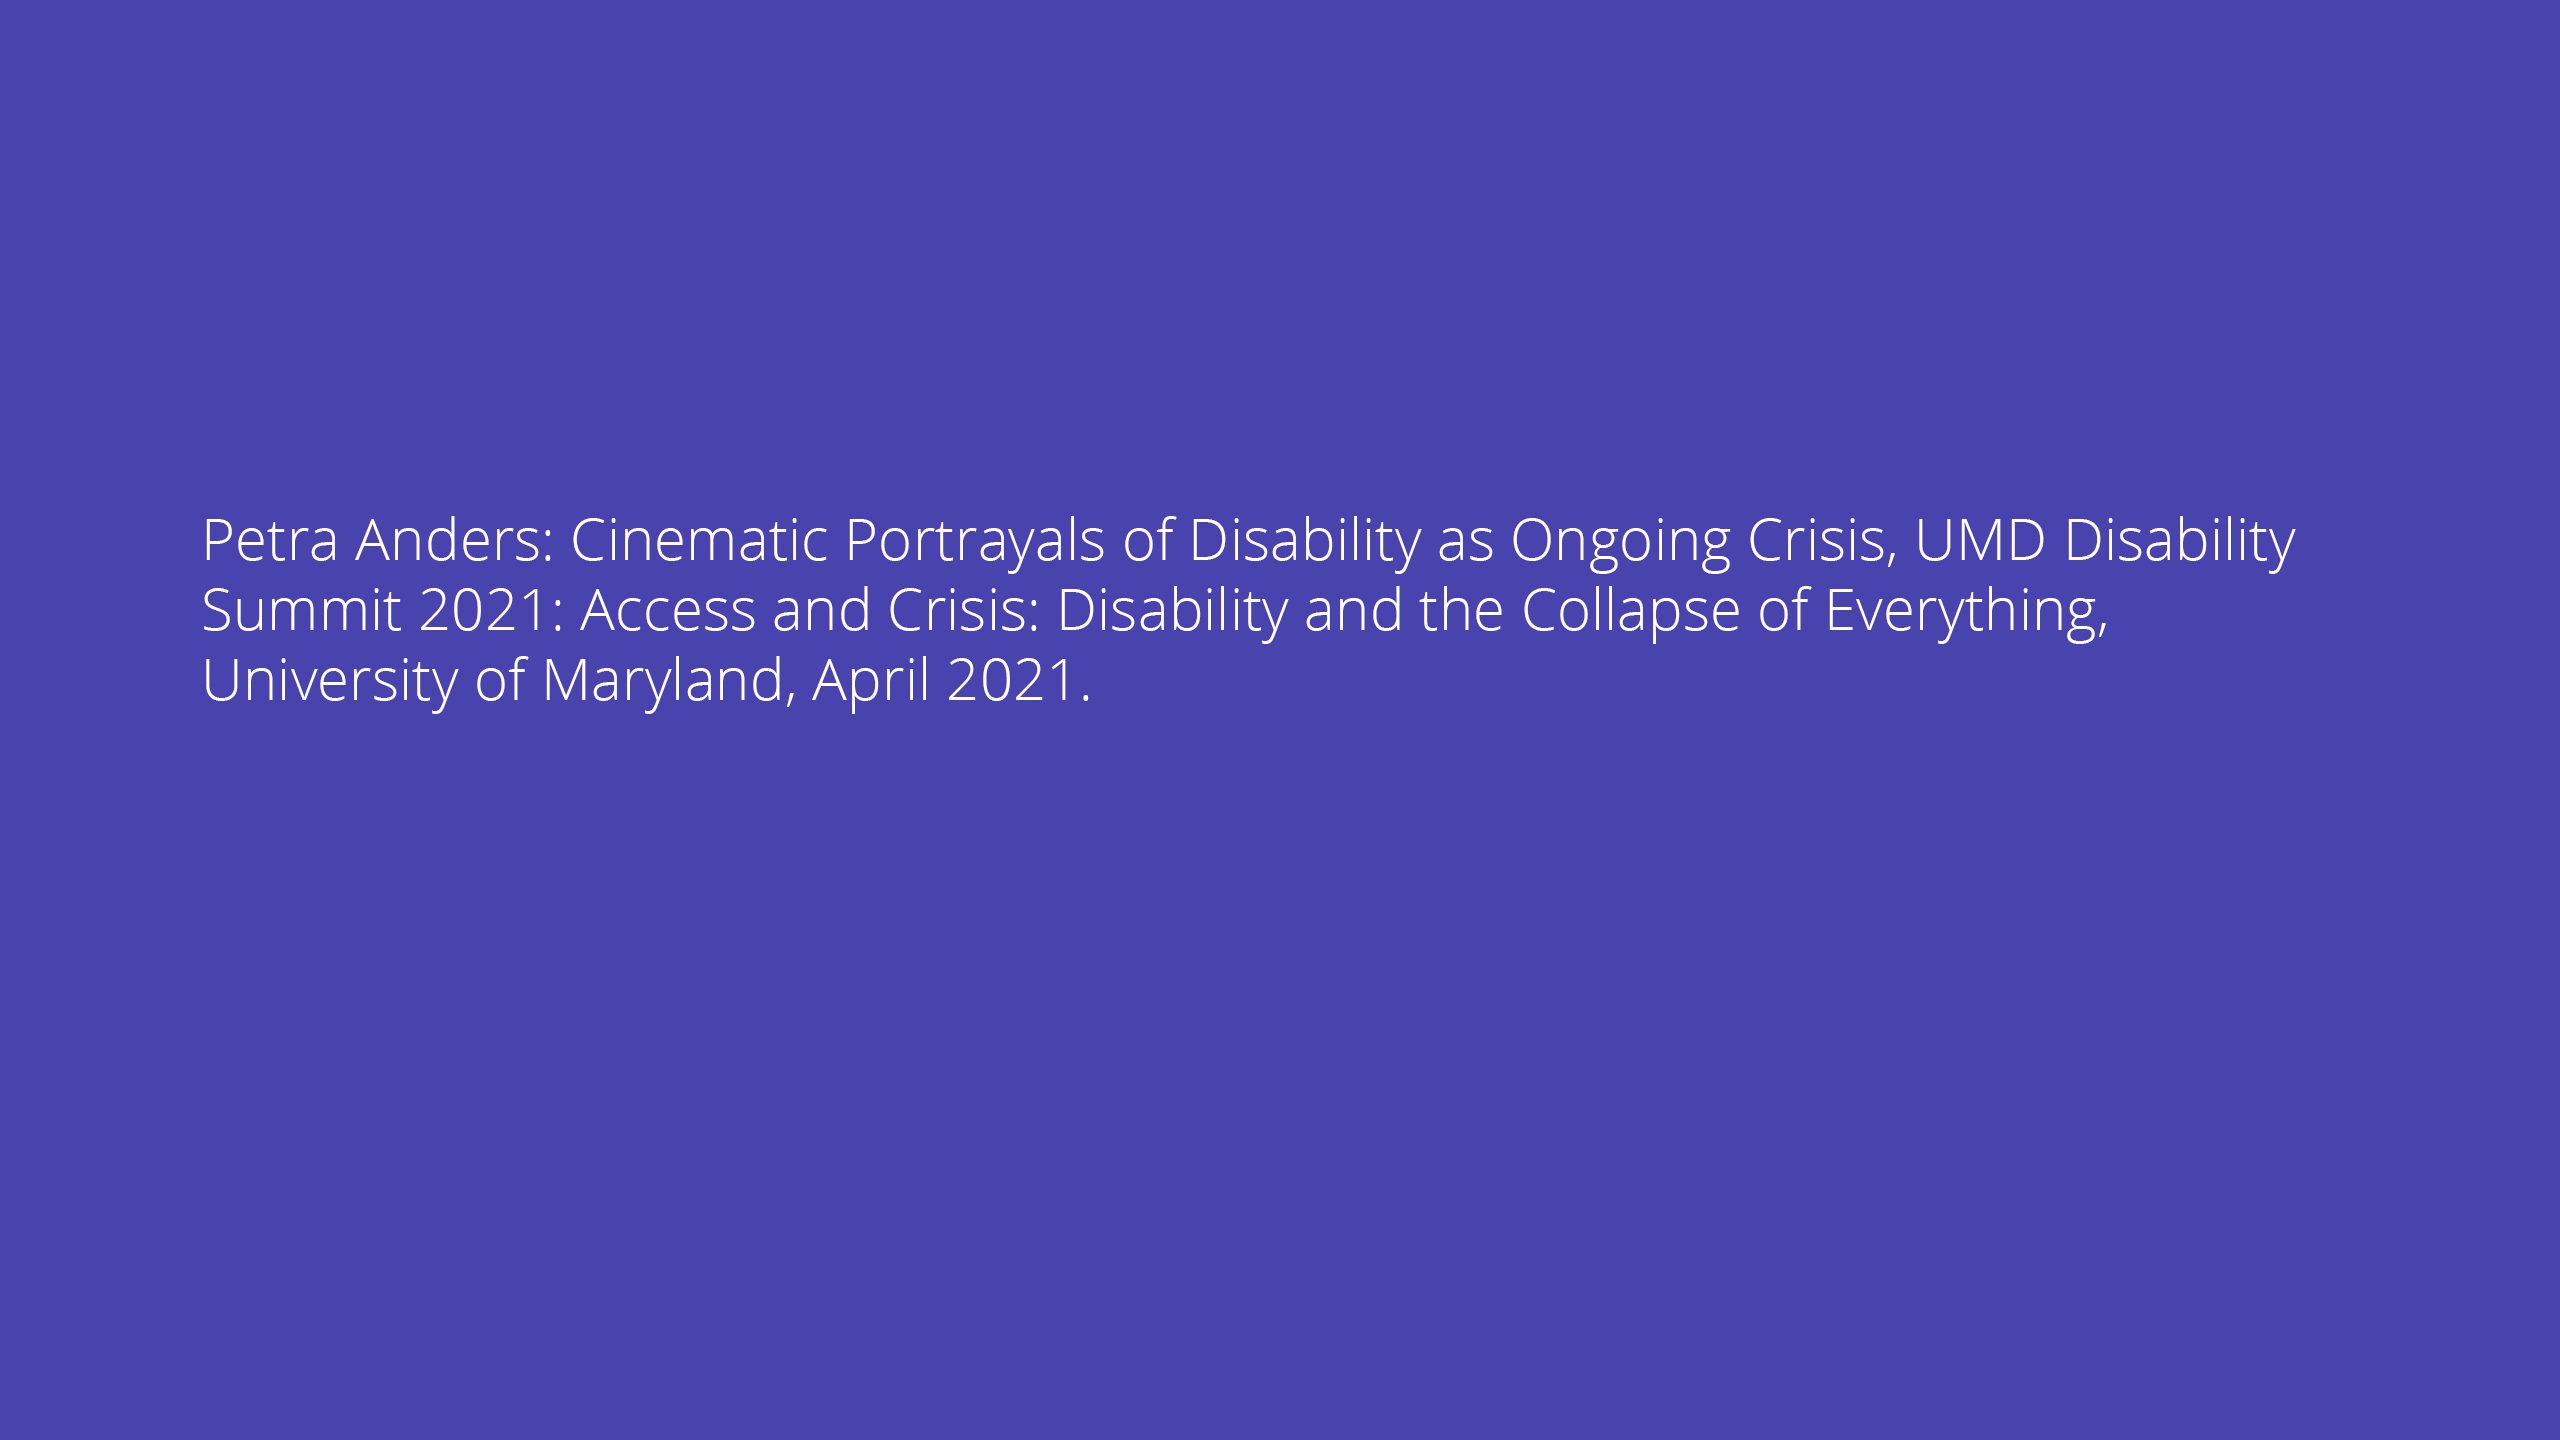 Petra Anders: Cinematic Portrayals of Disability as Ongoing Crisis, UMD Disability Summit 2021: Access and Crisis: Disability and the Collapse of Everything, University of Maryland, April 2021.